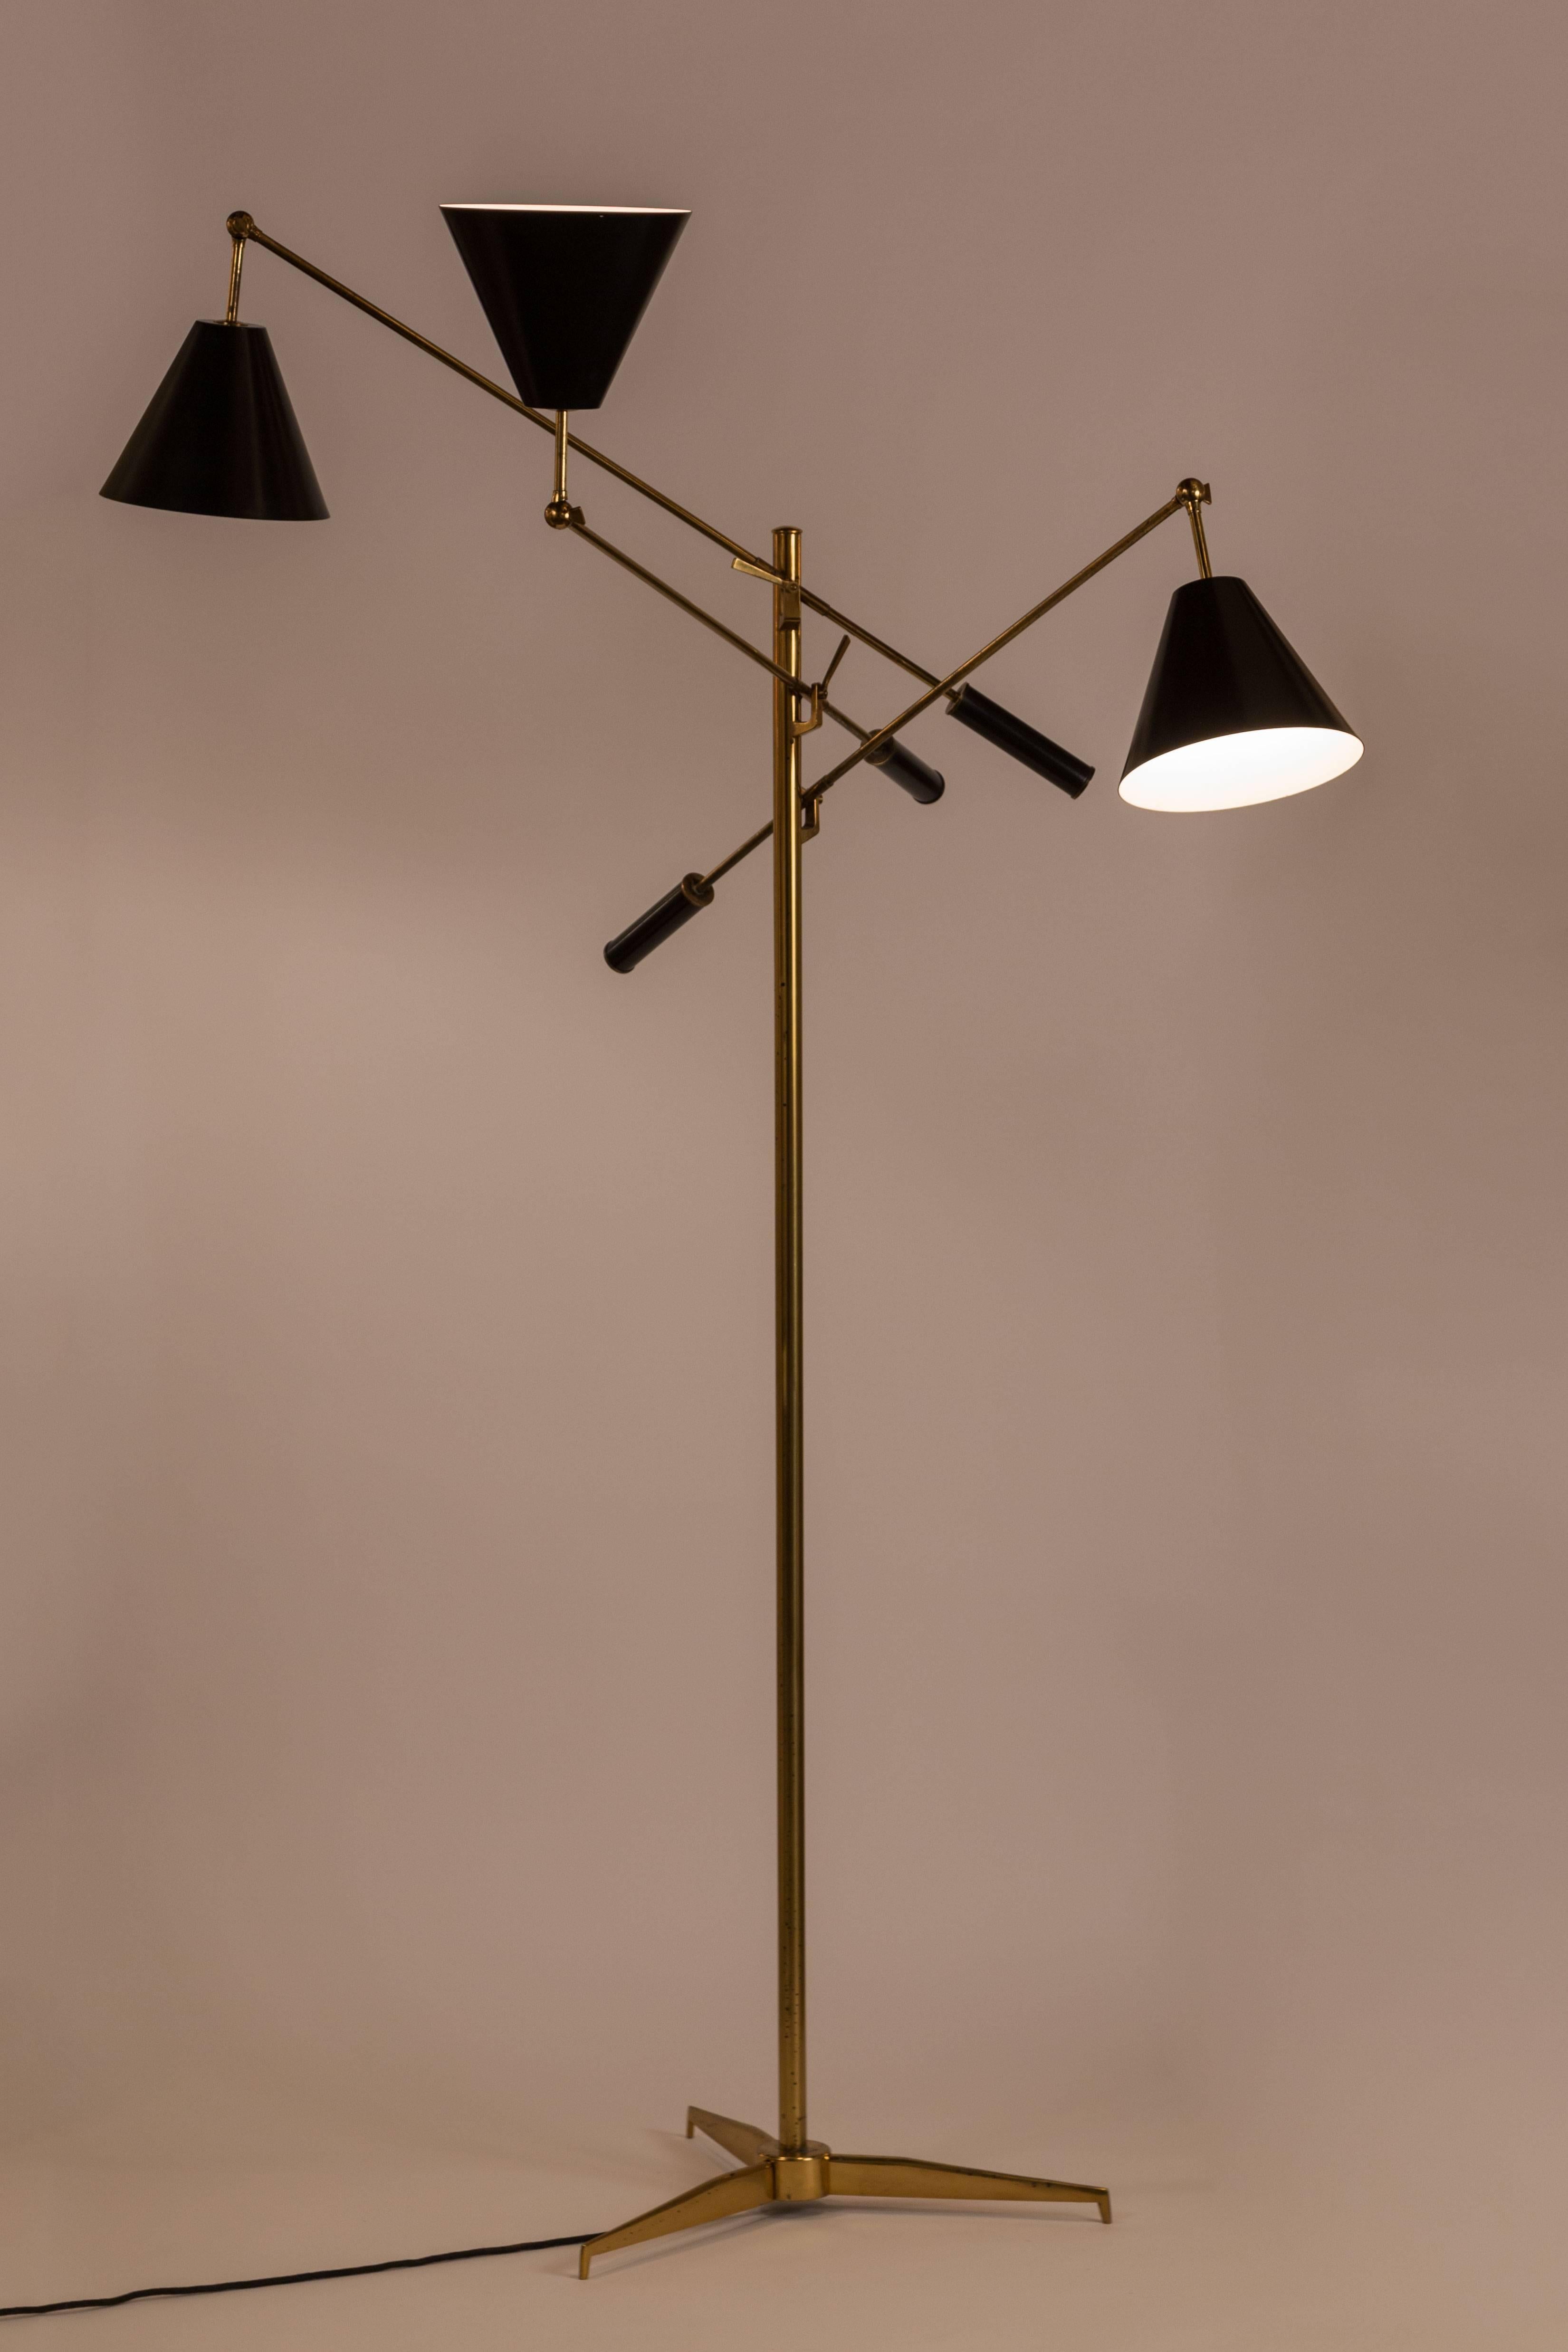 Rare three counter balance arm floor lamp with leather grips by Angelo Lelli for Arredoluce. Solid brass. Each shade articulates with brass key. Rewired. Takes 3 E27 60w maximum bulbs. Maintains original manufacturers stamp on brass floor switch.